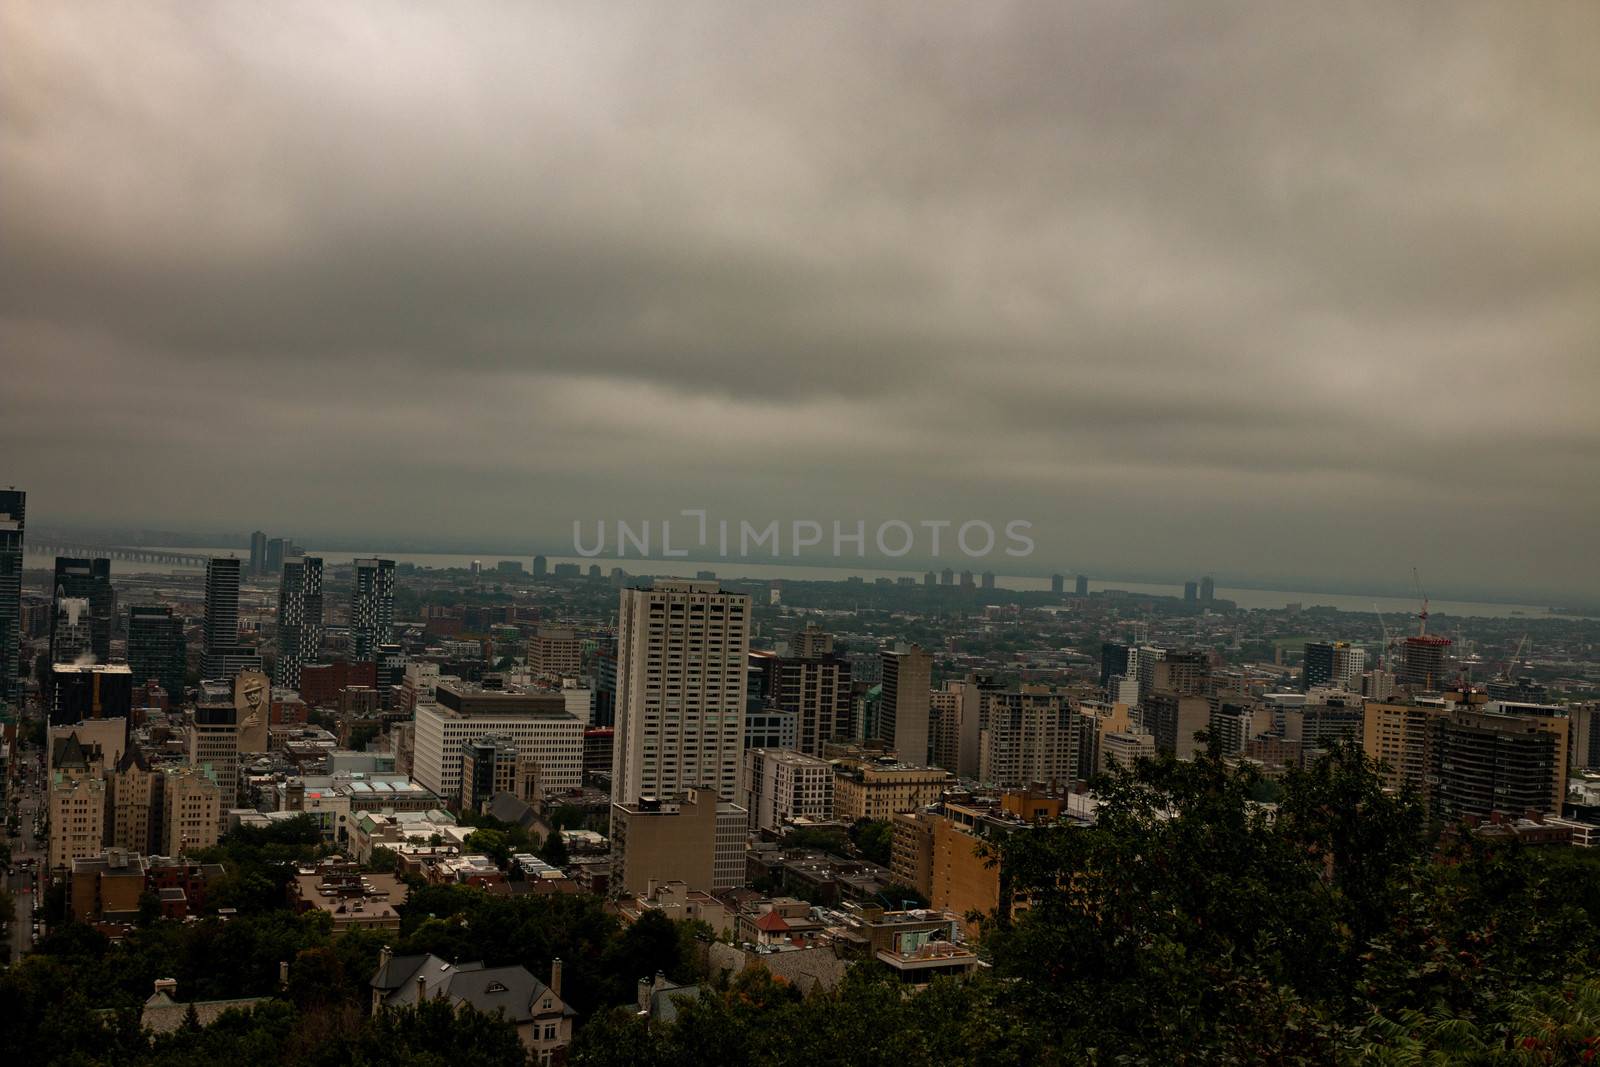 Montreal skyline view from the popular Mont Royal Lookout. High quality photo